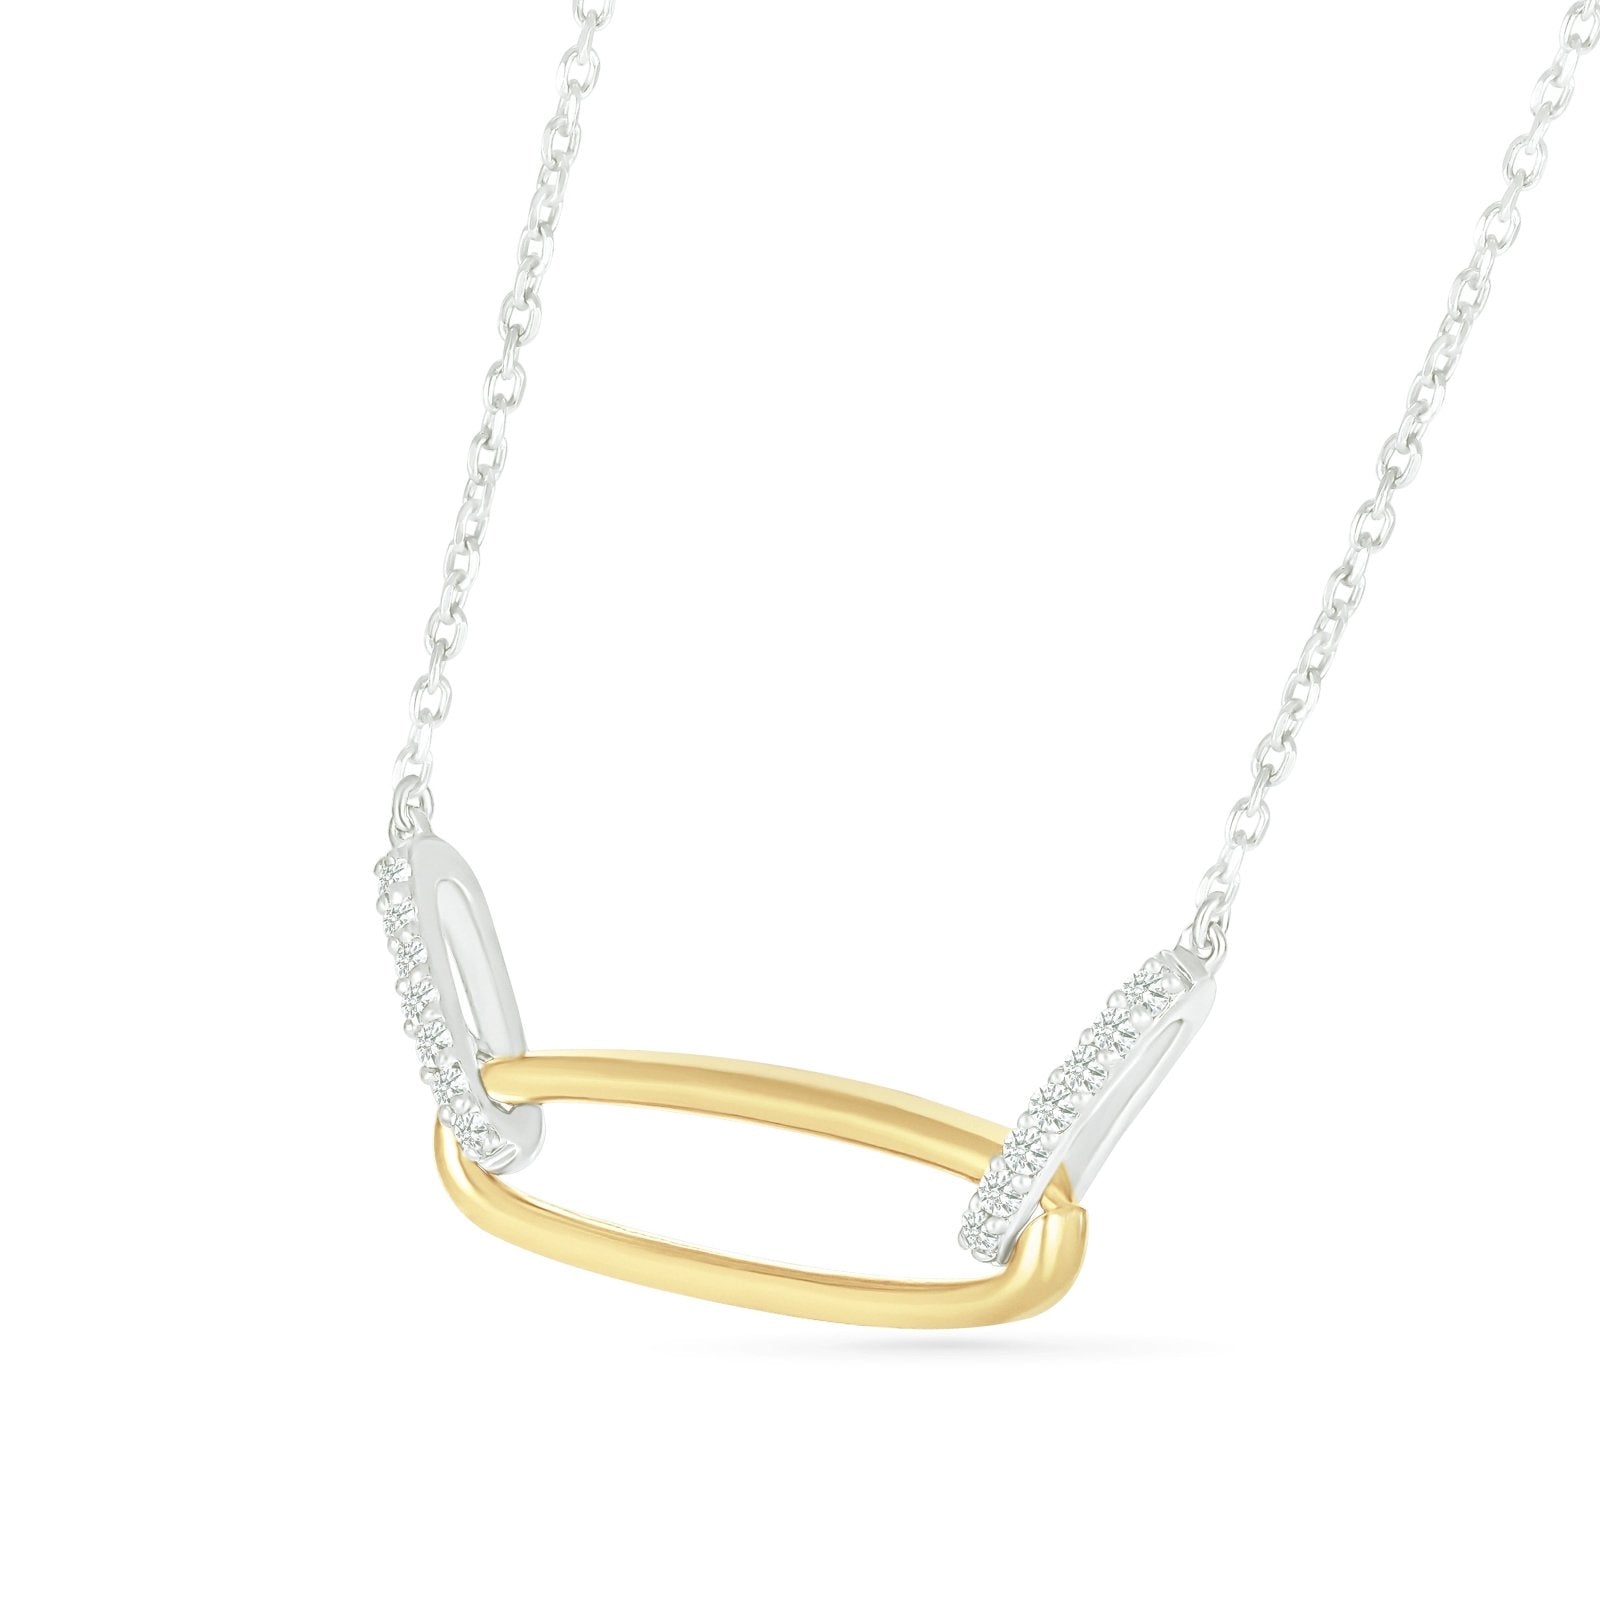 Interlocking Diamond and Gold Oval Pendant with Three Links Necklace Necklaces Estella Collection 32688 925 Diamond Sterling Silver #tag4# #tag5# #tag6# #tag7# #tag8# #tag9# #tag10#